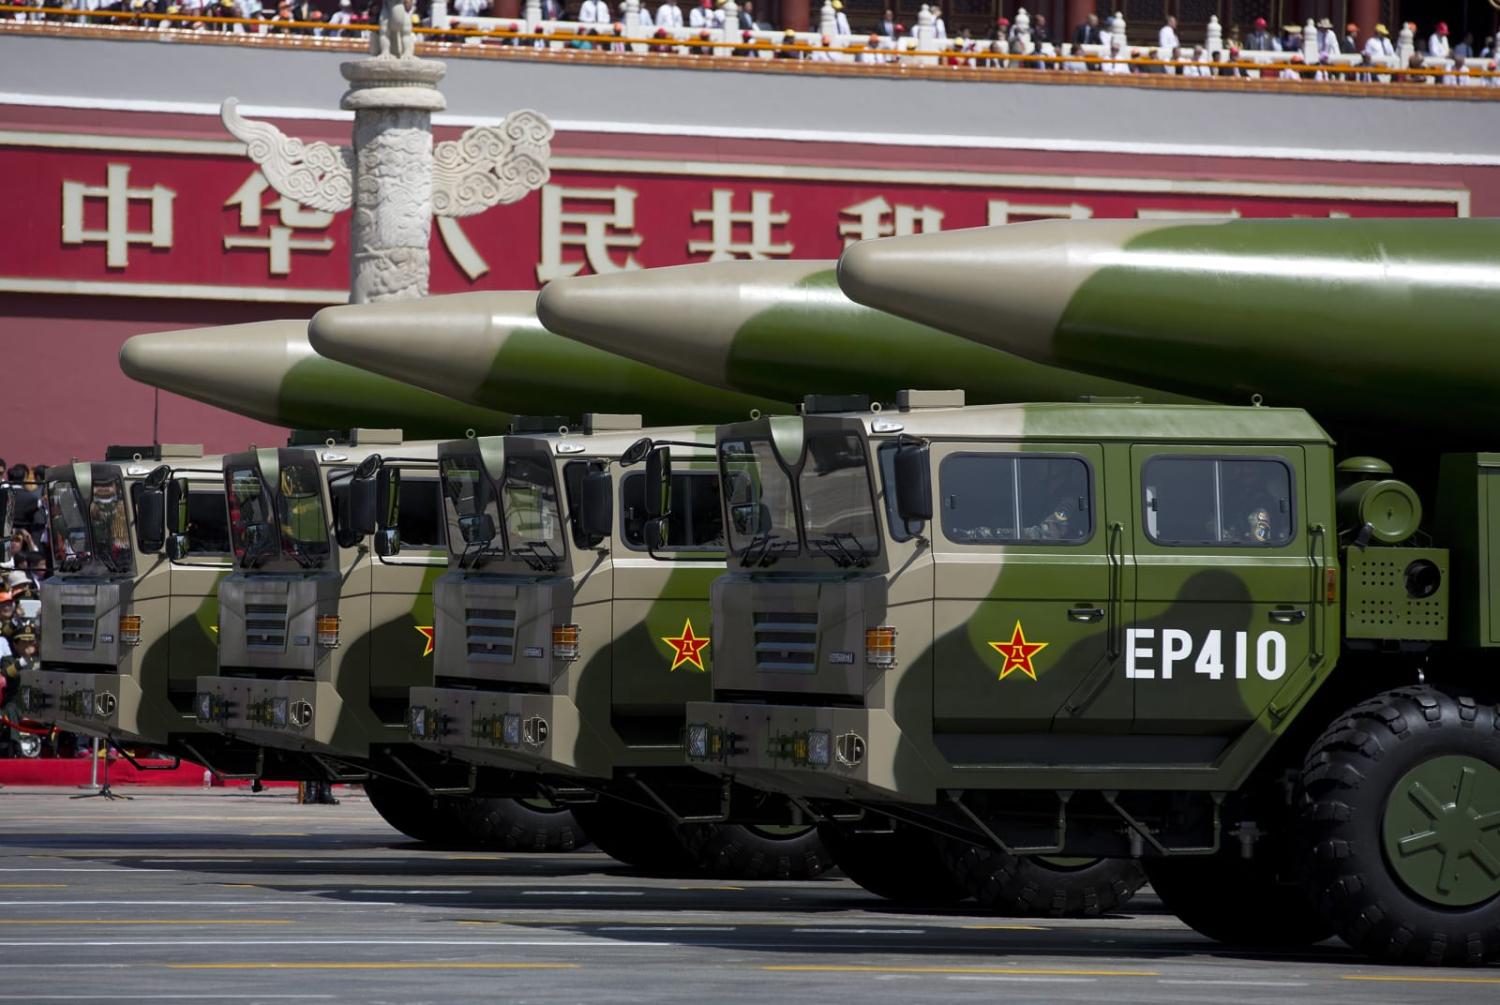 Military vehicles carrying DF-26 ballistic missiles at a 2015 parade in Tiananmen Square, Beijing (Andy Wong via Getty Images)